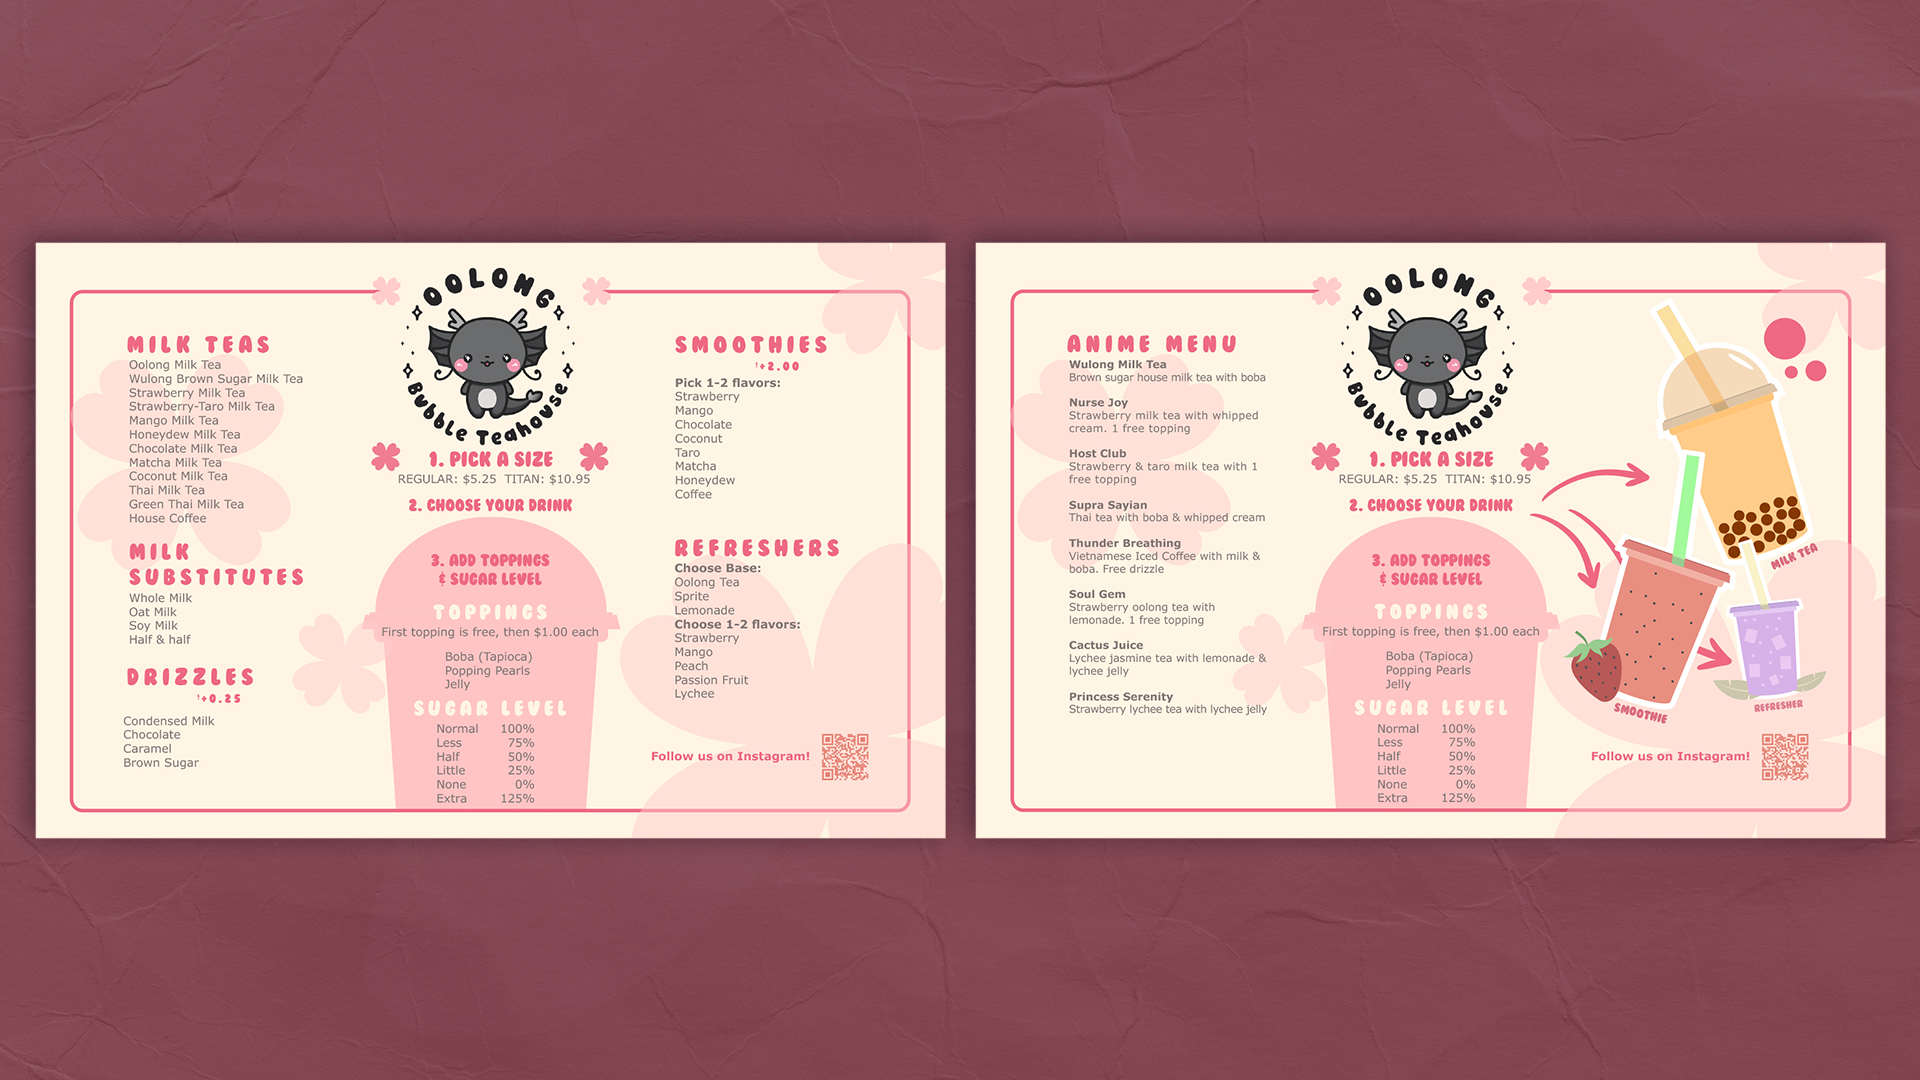 "Oolong Bubble Teahouse Menu" / "Oolong Bubble Teahouse Menu", café menu, 13x8.5 printed menu, 2022. This is a menu redesign of a bubble tea shop located in Kennesaw, GA. My design consists of pink Japanese cherry blossoms and circular patterns in order to convey the theme of the café.